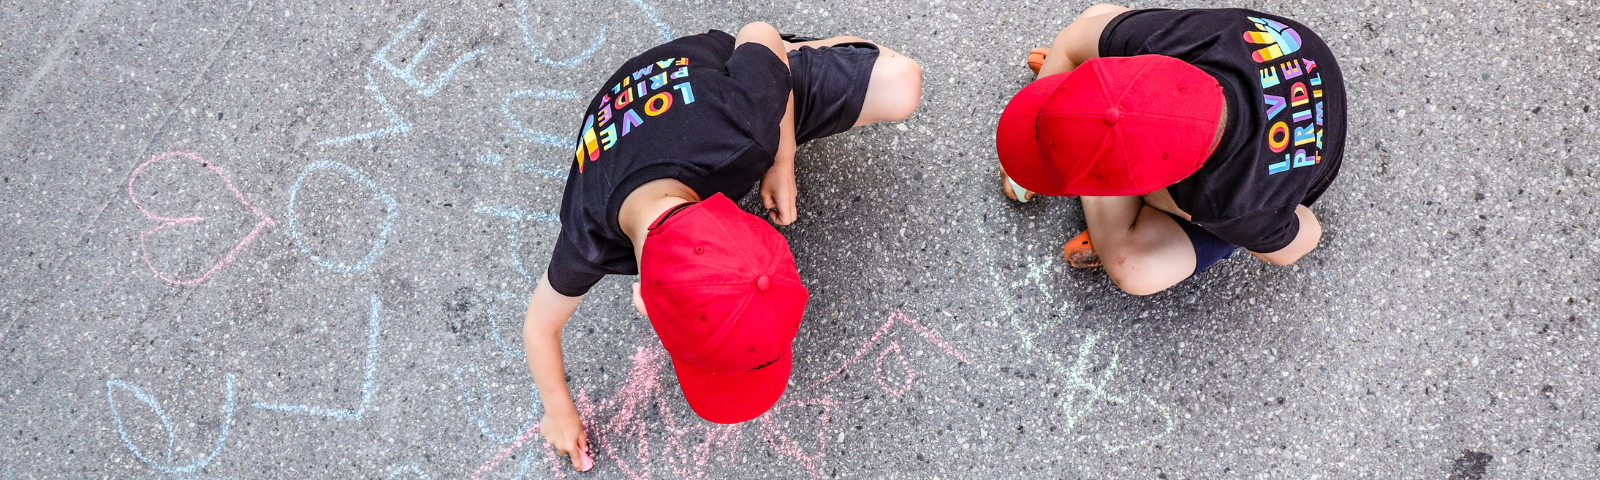 Overhead view of two children drawing on pavement with chalk